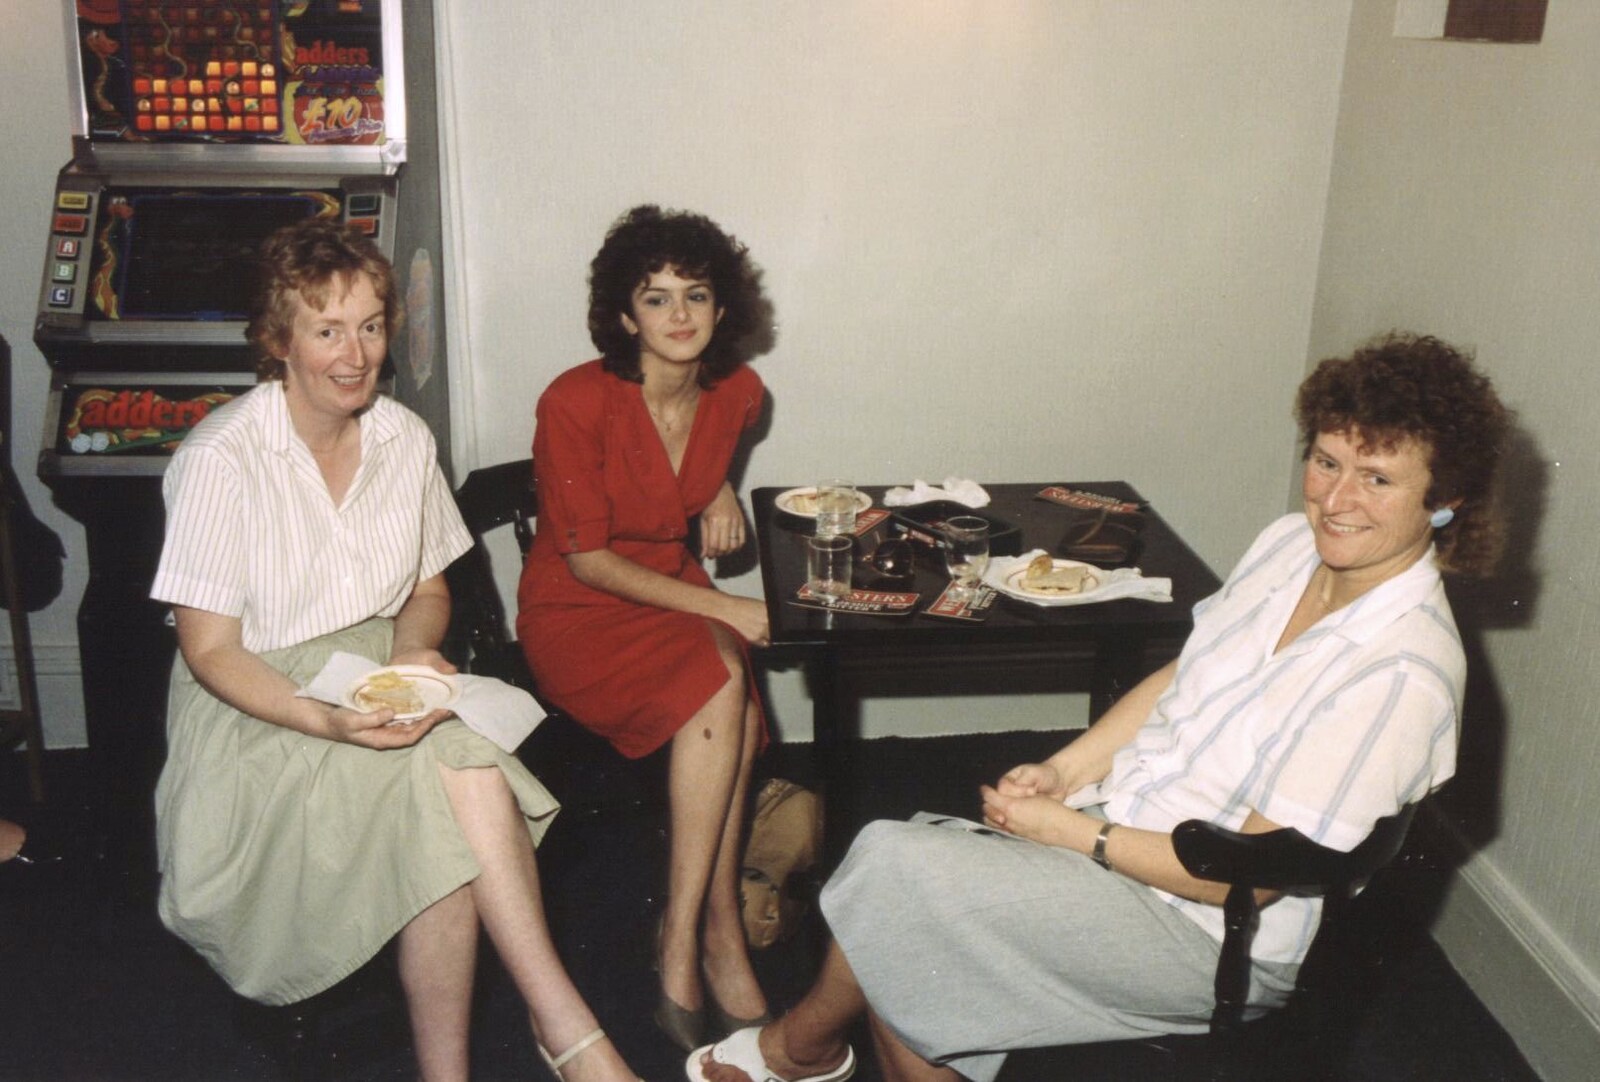 Bindery Sue, Rachel and Wendy from Kite Flying, and an Introduction to BPCC Printec, Diss, Norfolk - 3rd August 1989